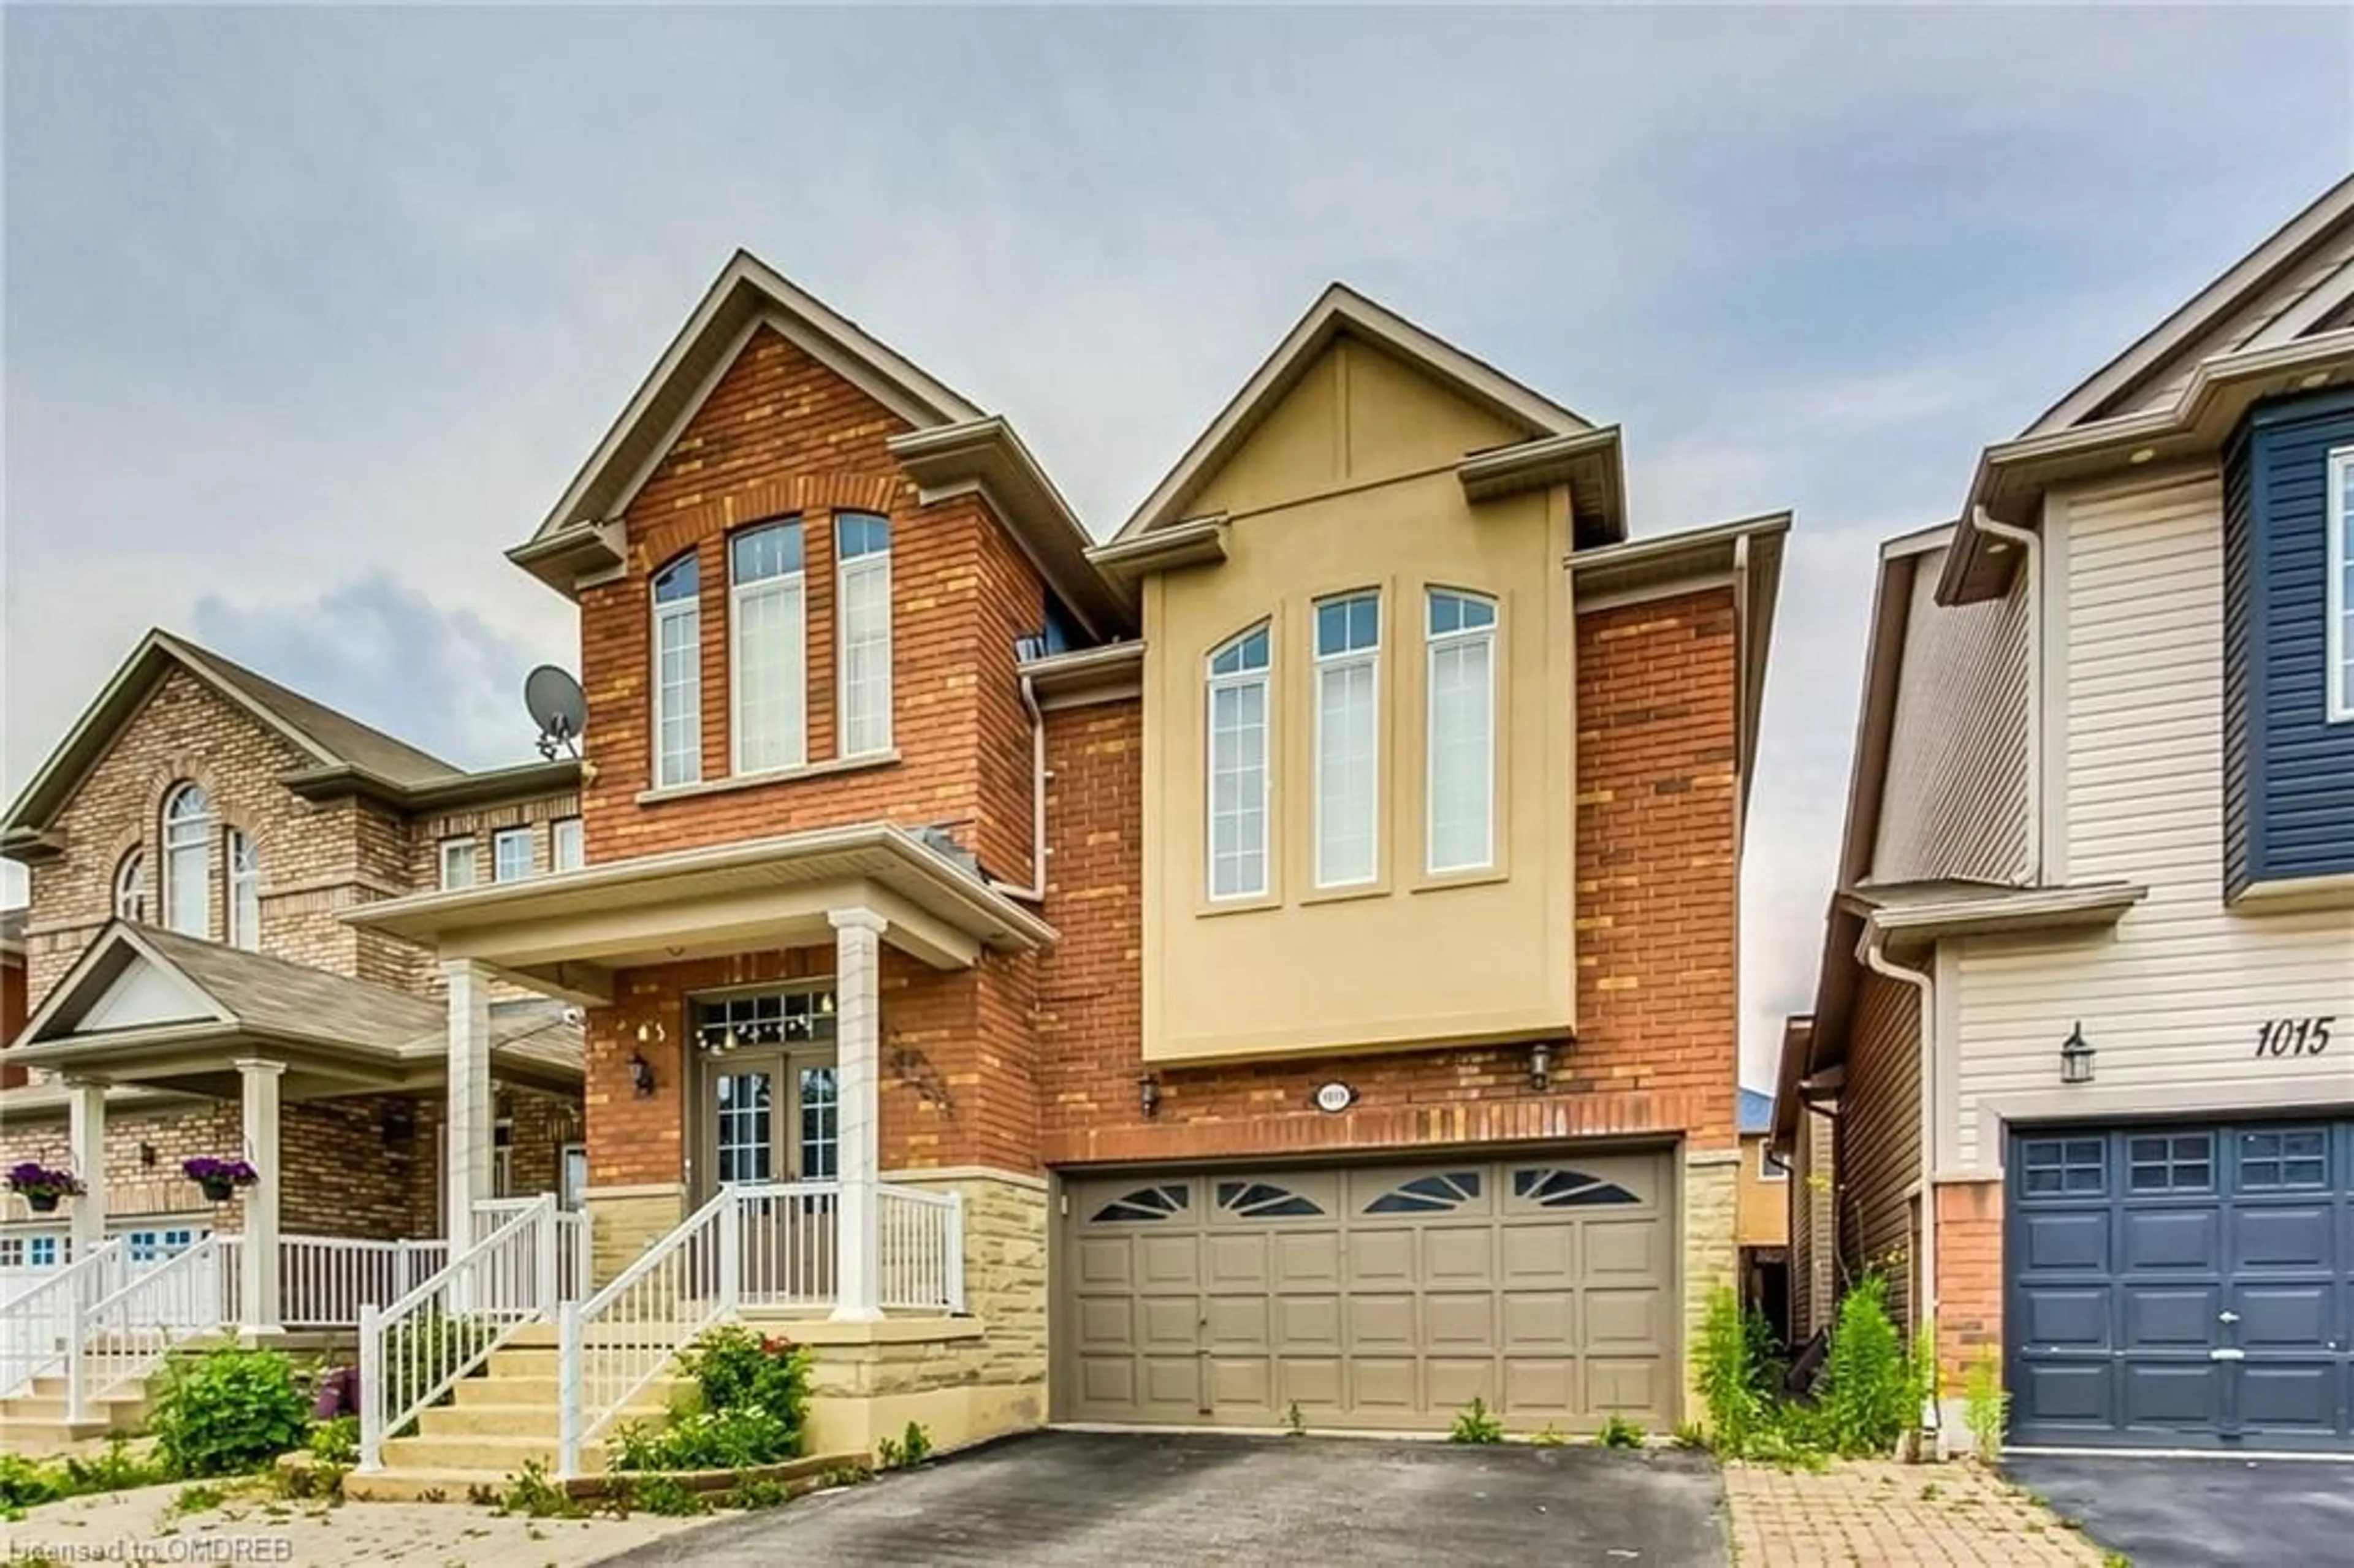 Home with brick exterior material for 1013 Mccuaig Dr, Milton Ontario L9T 6S4